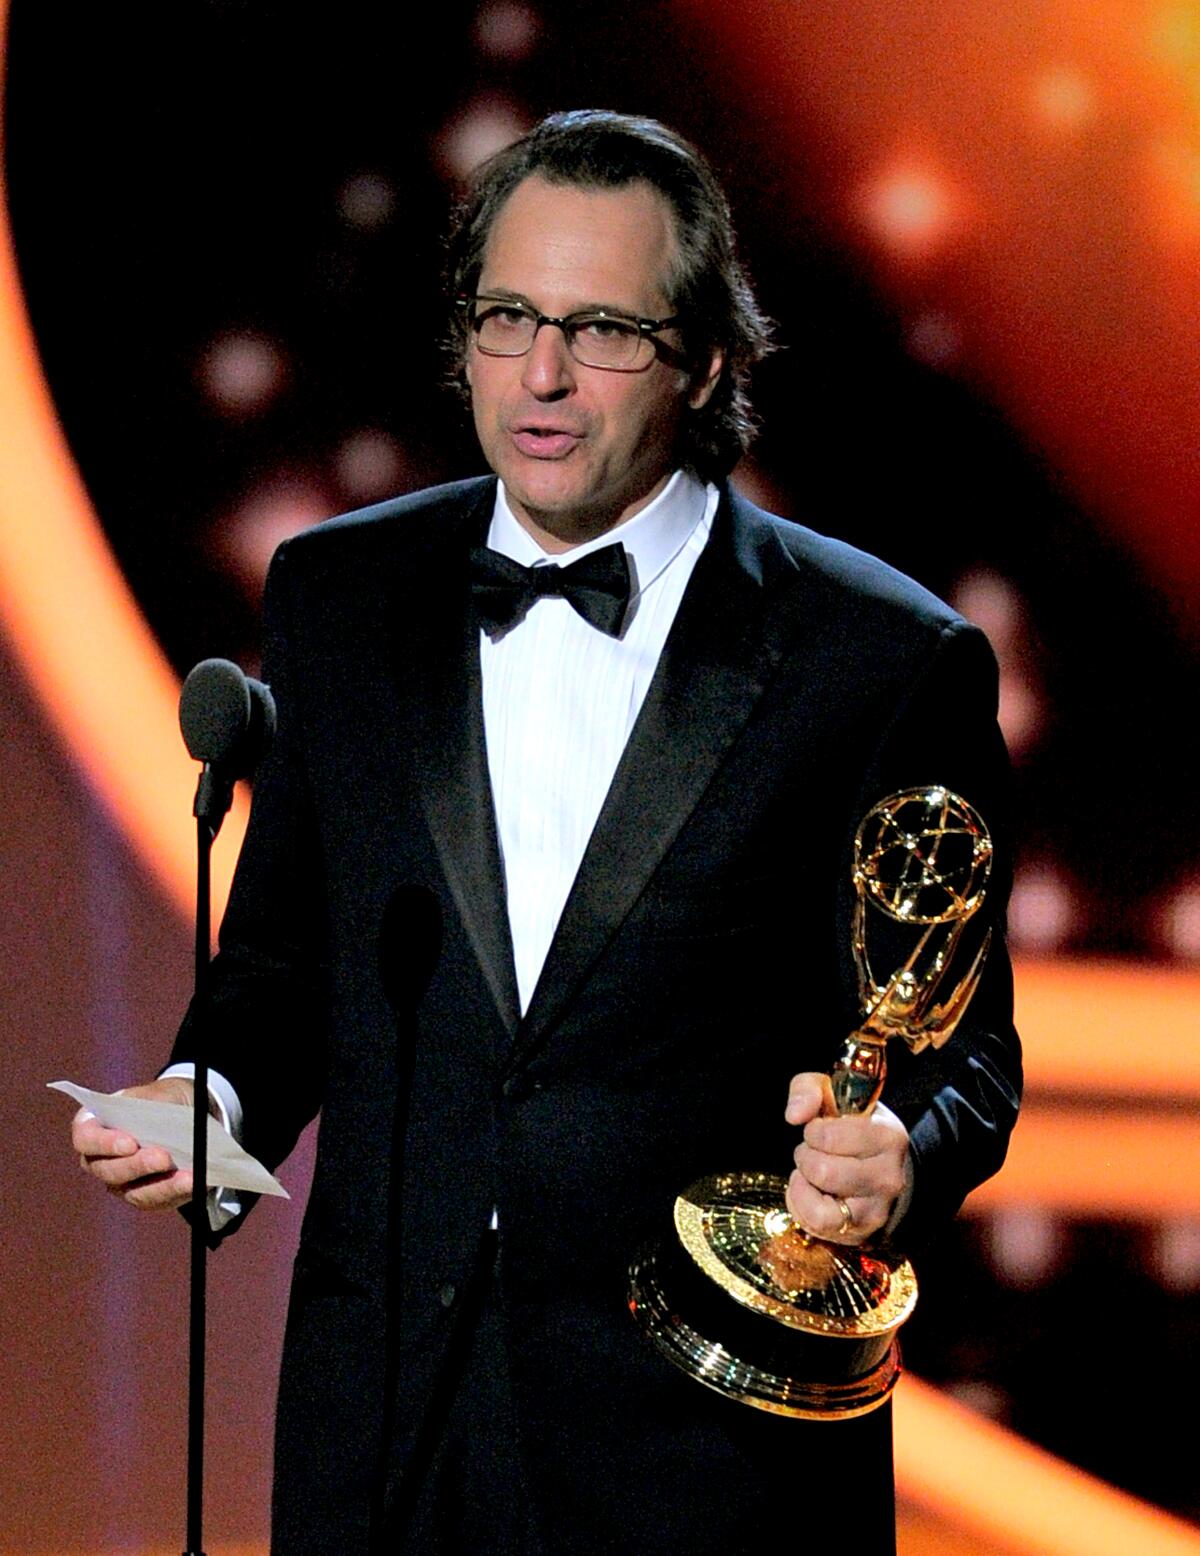 Jason Katims, in a black tuxedo, holds an Emmy statue as he delivers an acceptance speech onstage.